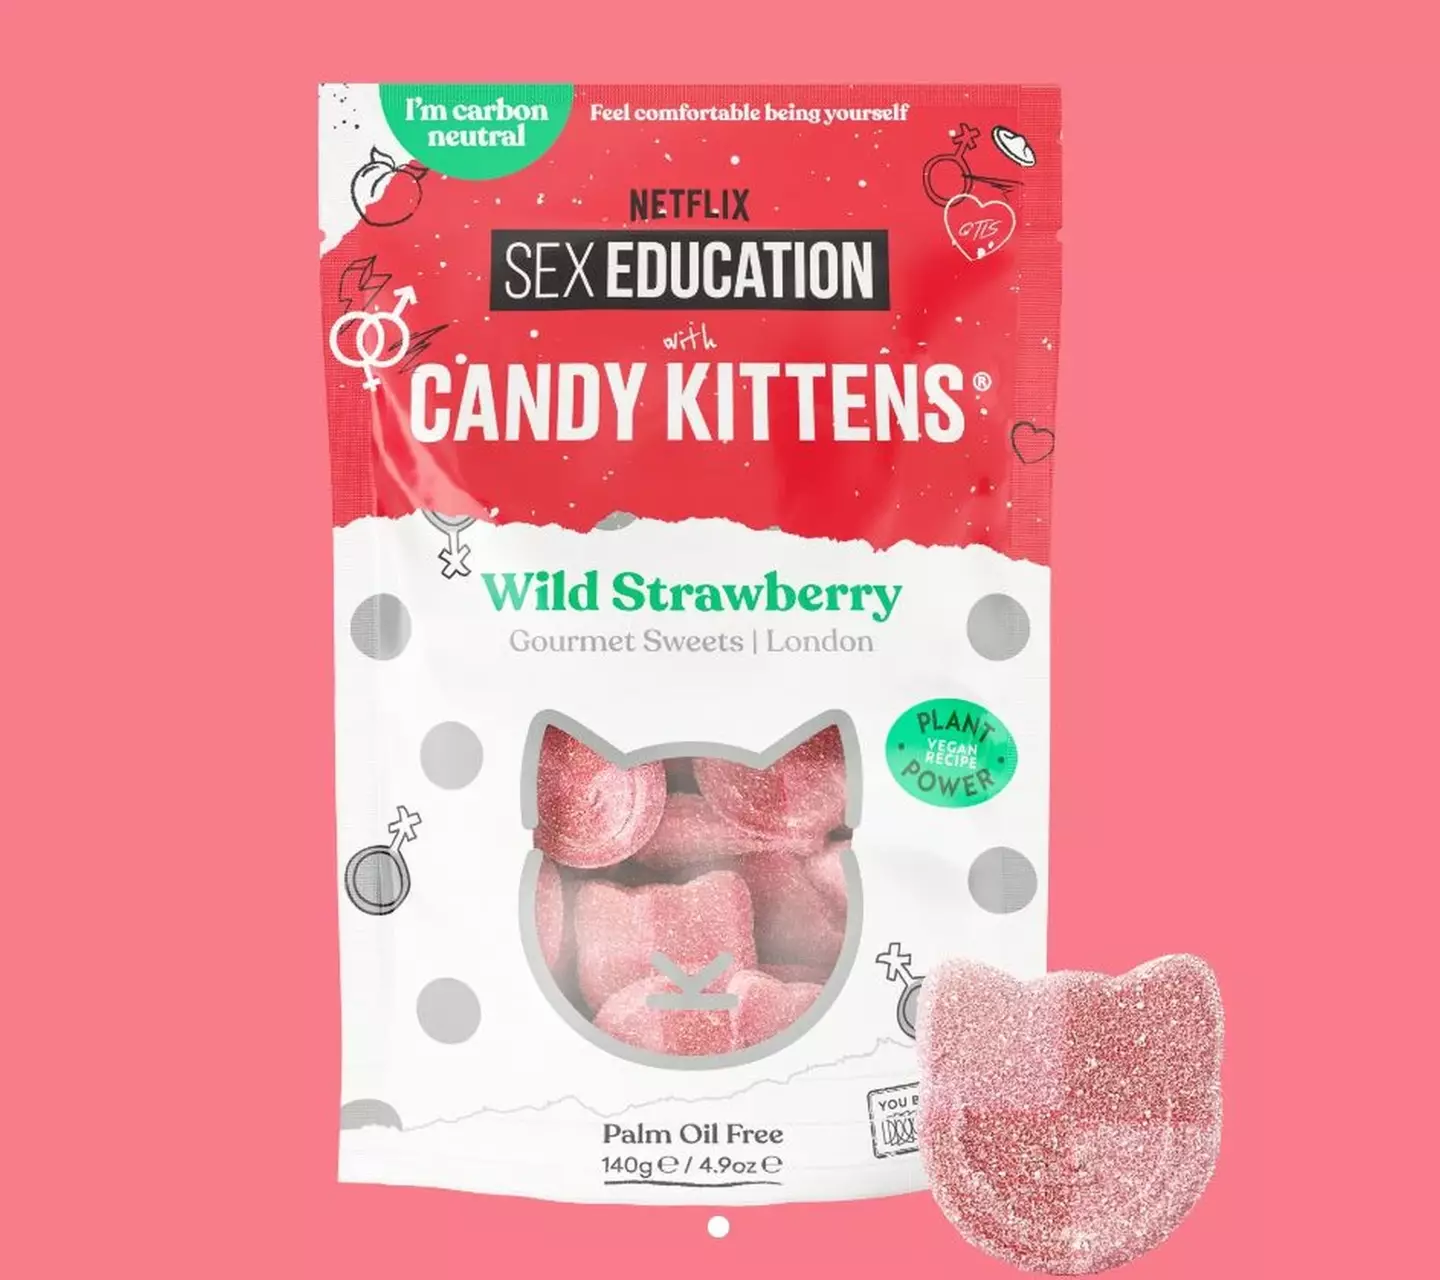 Candy Kittens was founded by Made In Chelsea’s Jamie Laing.